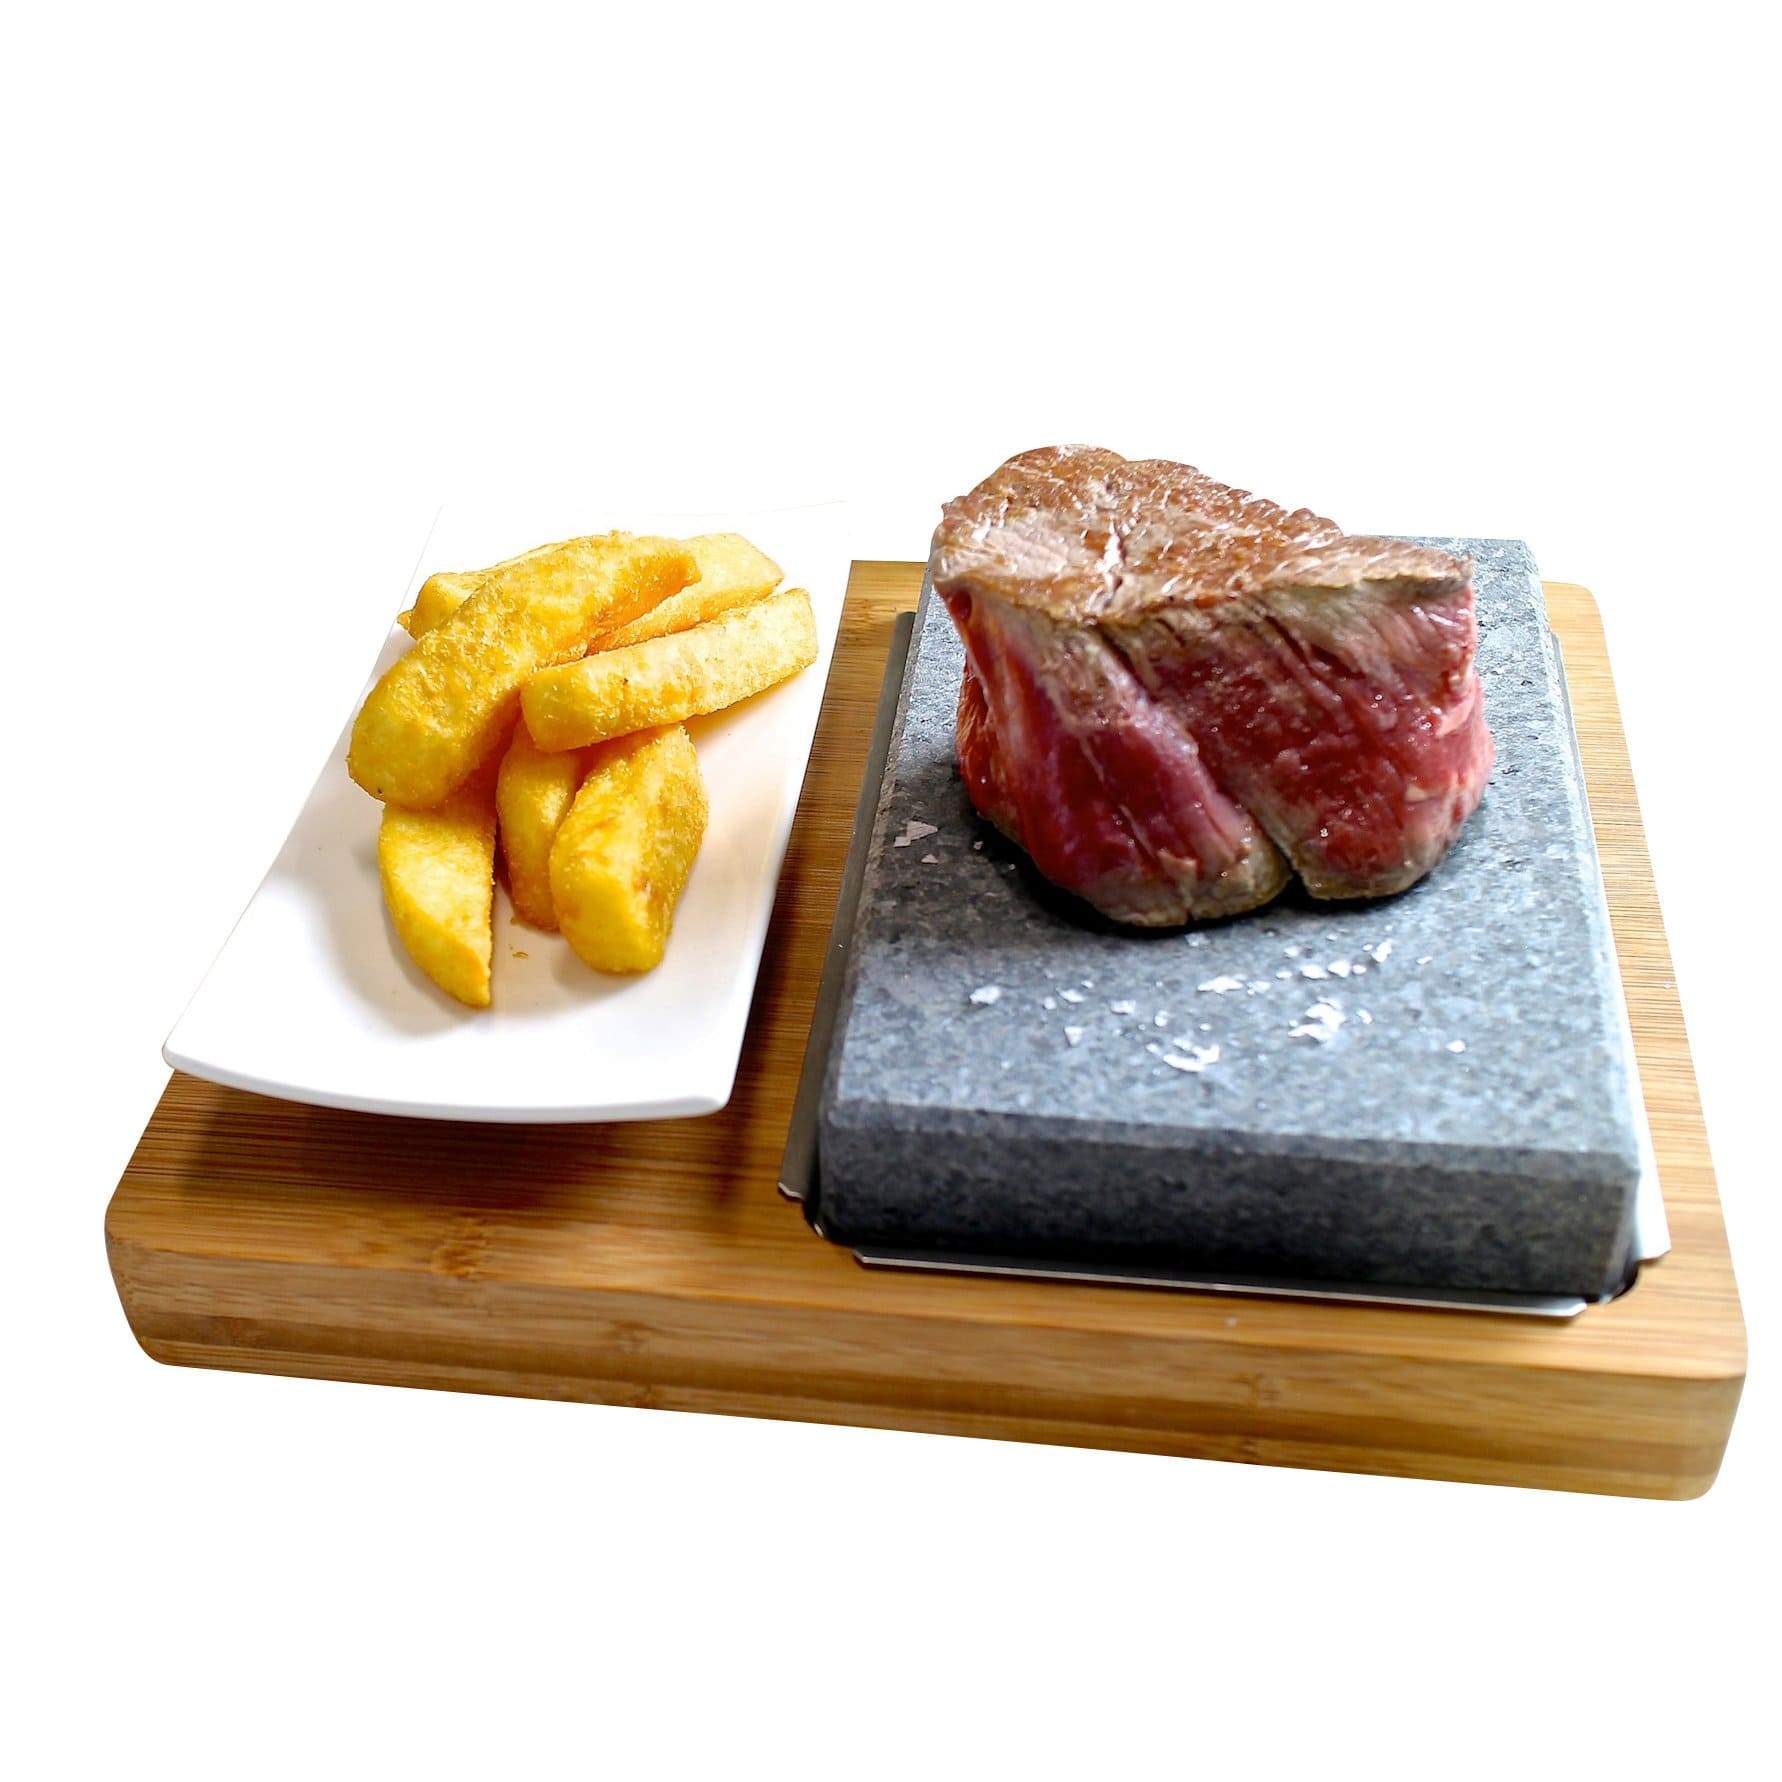 Black Rock Grill Hot Stone Cooking  Steak Stone Restaurant Oven Package